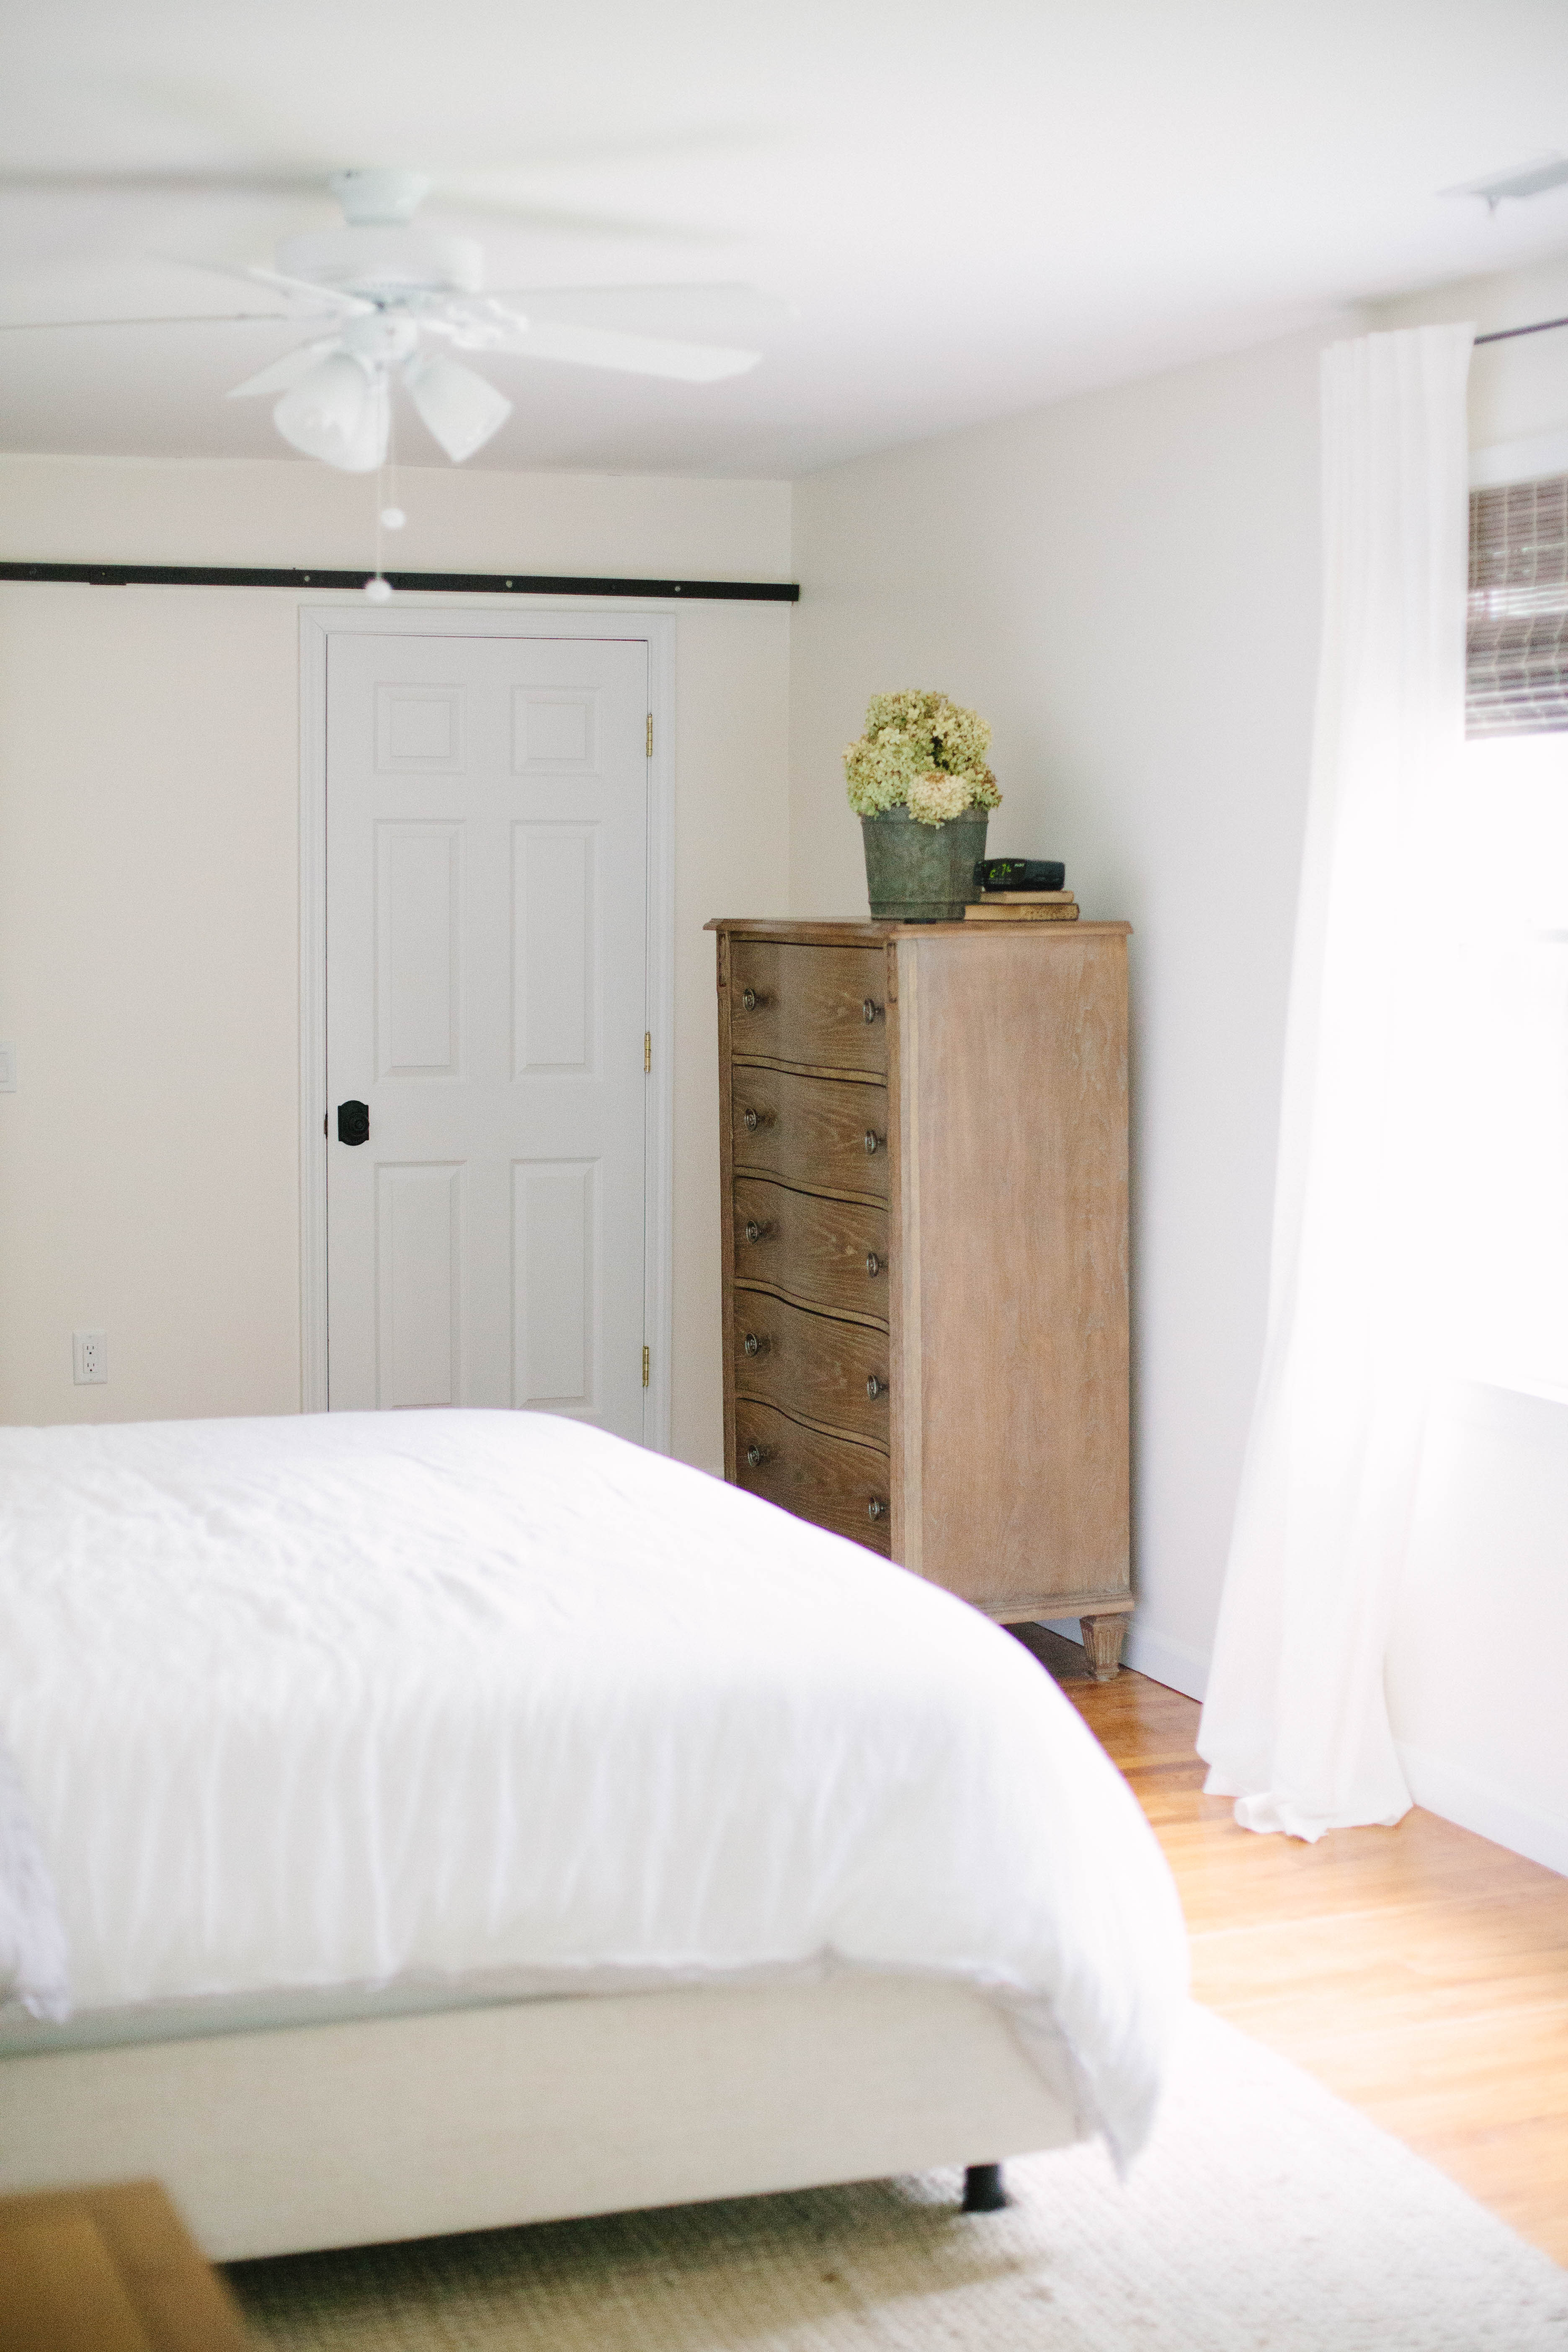 Having trouble deciding on a paint color? Check out this post on 5 Benefits of Having White Walls and why they're the best color for the space!